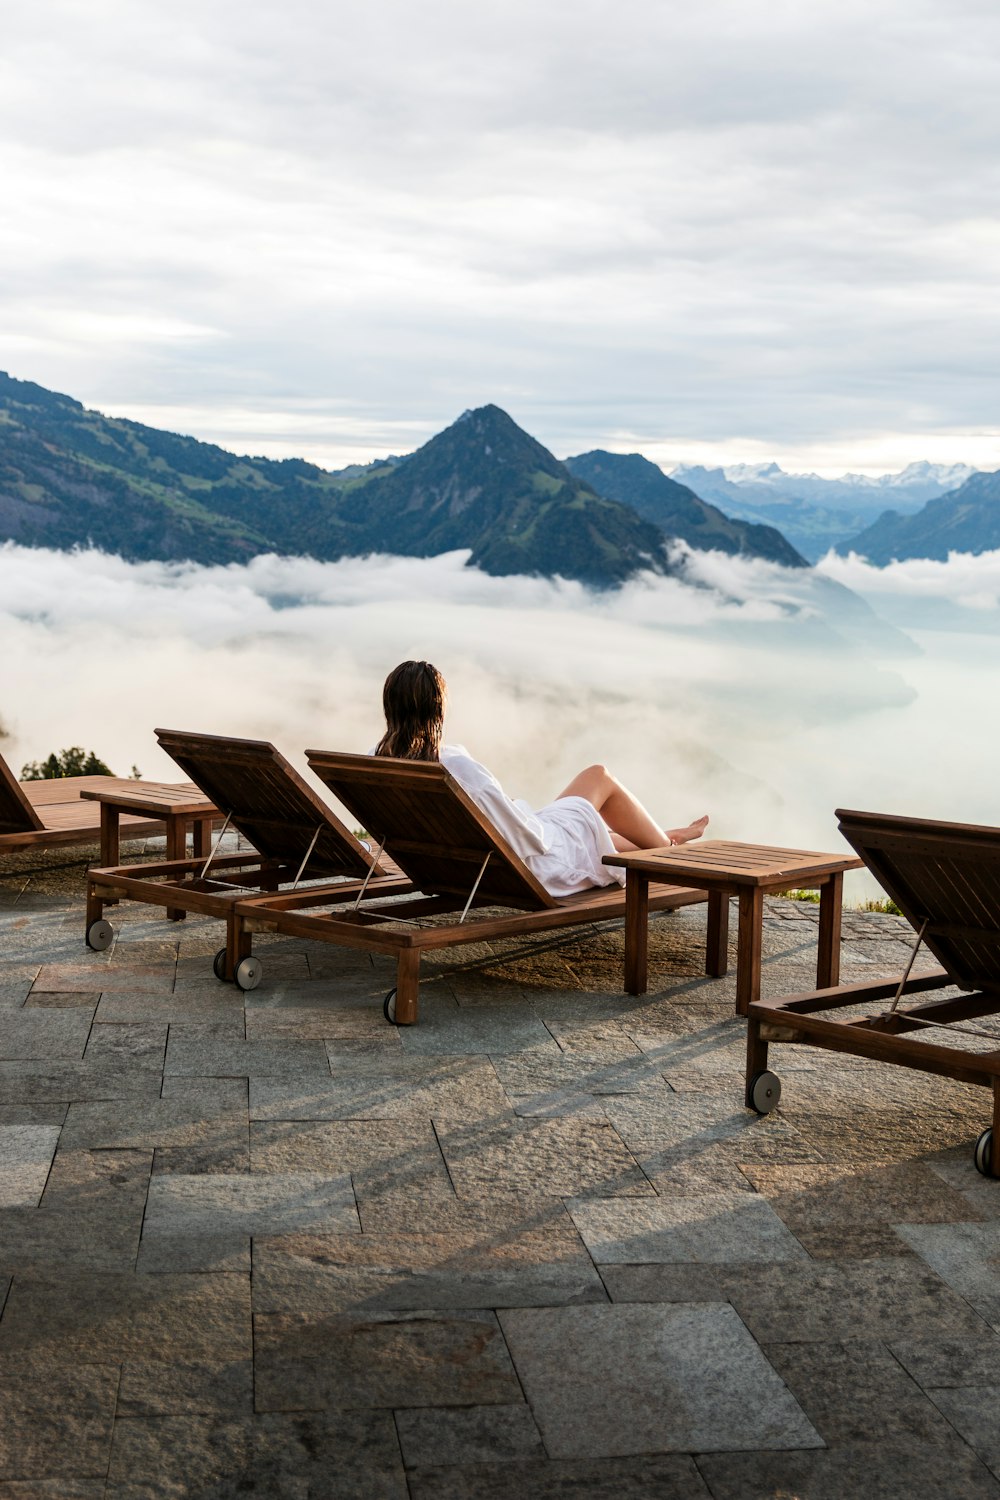 a woman is sitting on a chaise lounge in the mountains